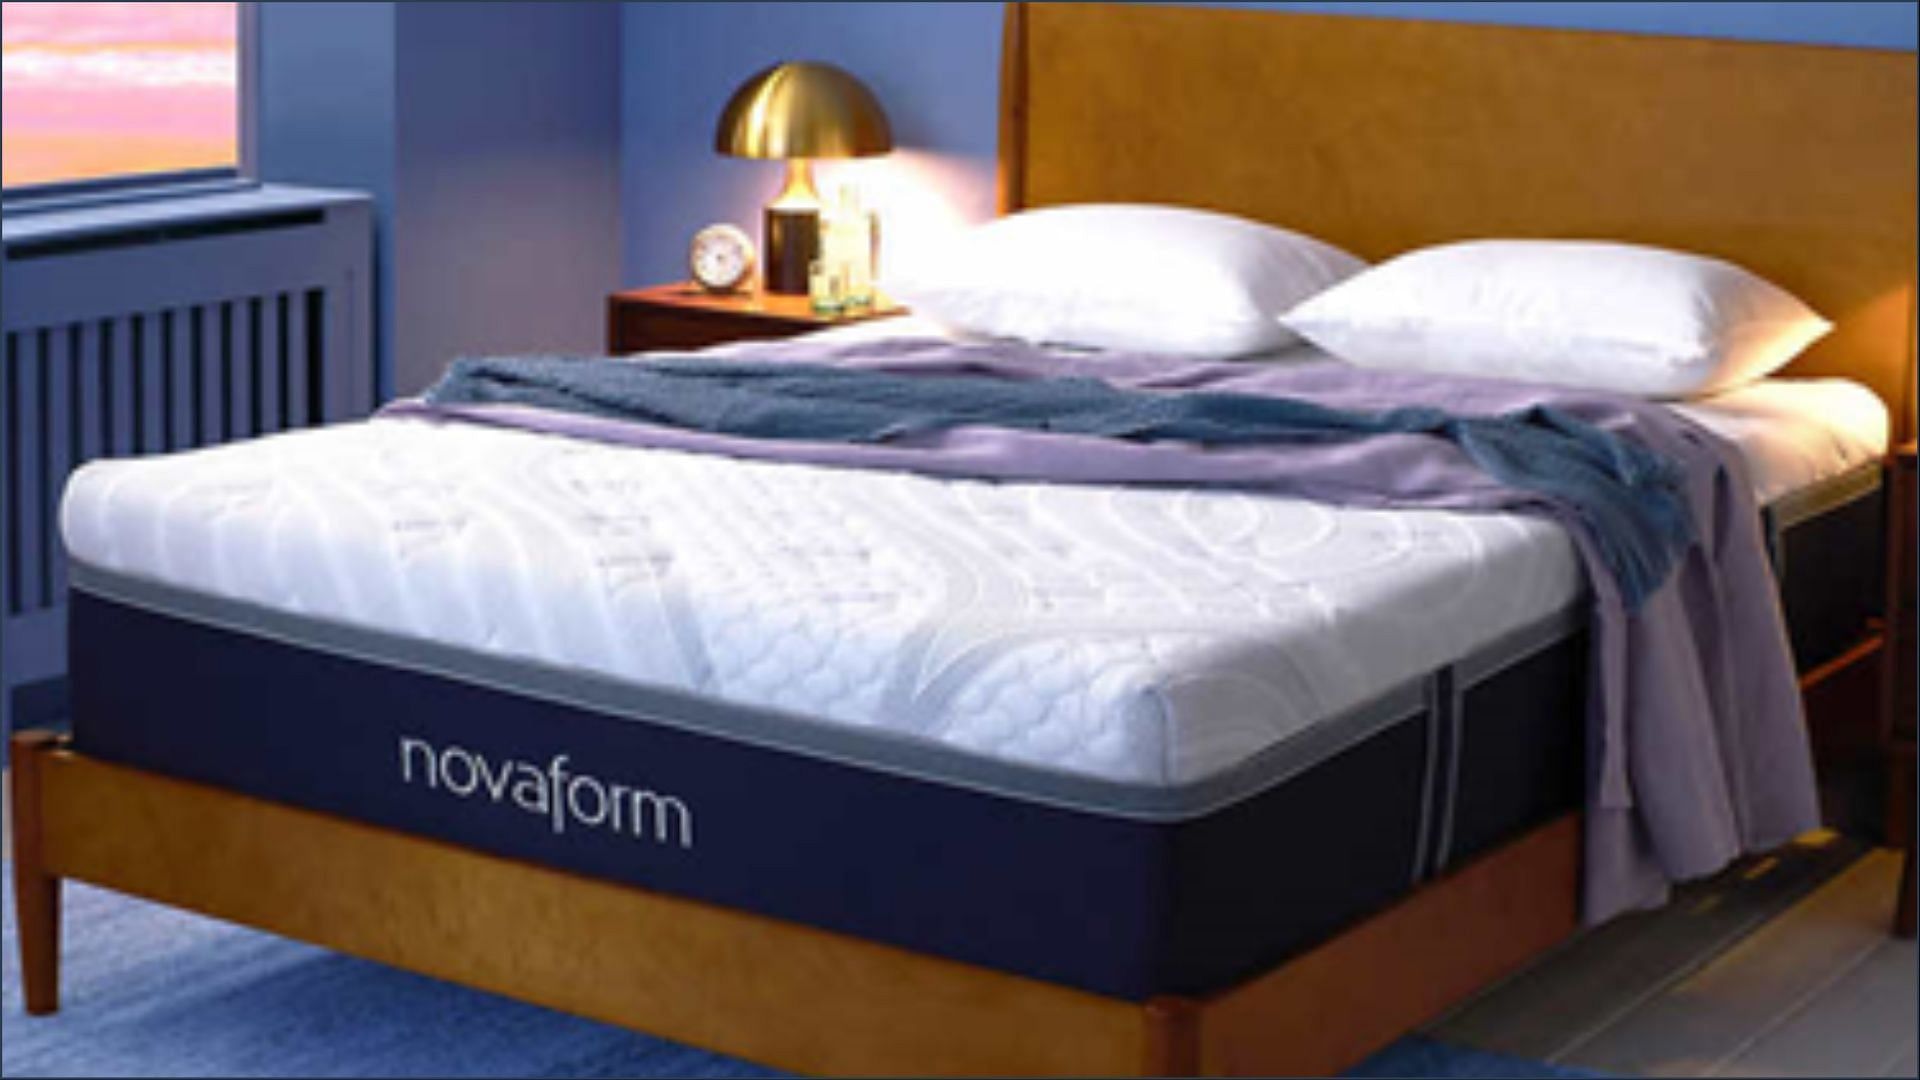 The recalled Novaform Mattresses sold at Costco may have been exposed to water and could have developed molds (Image via CPSC)